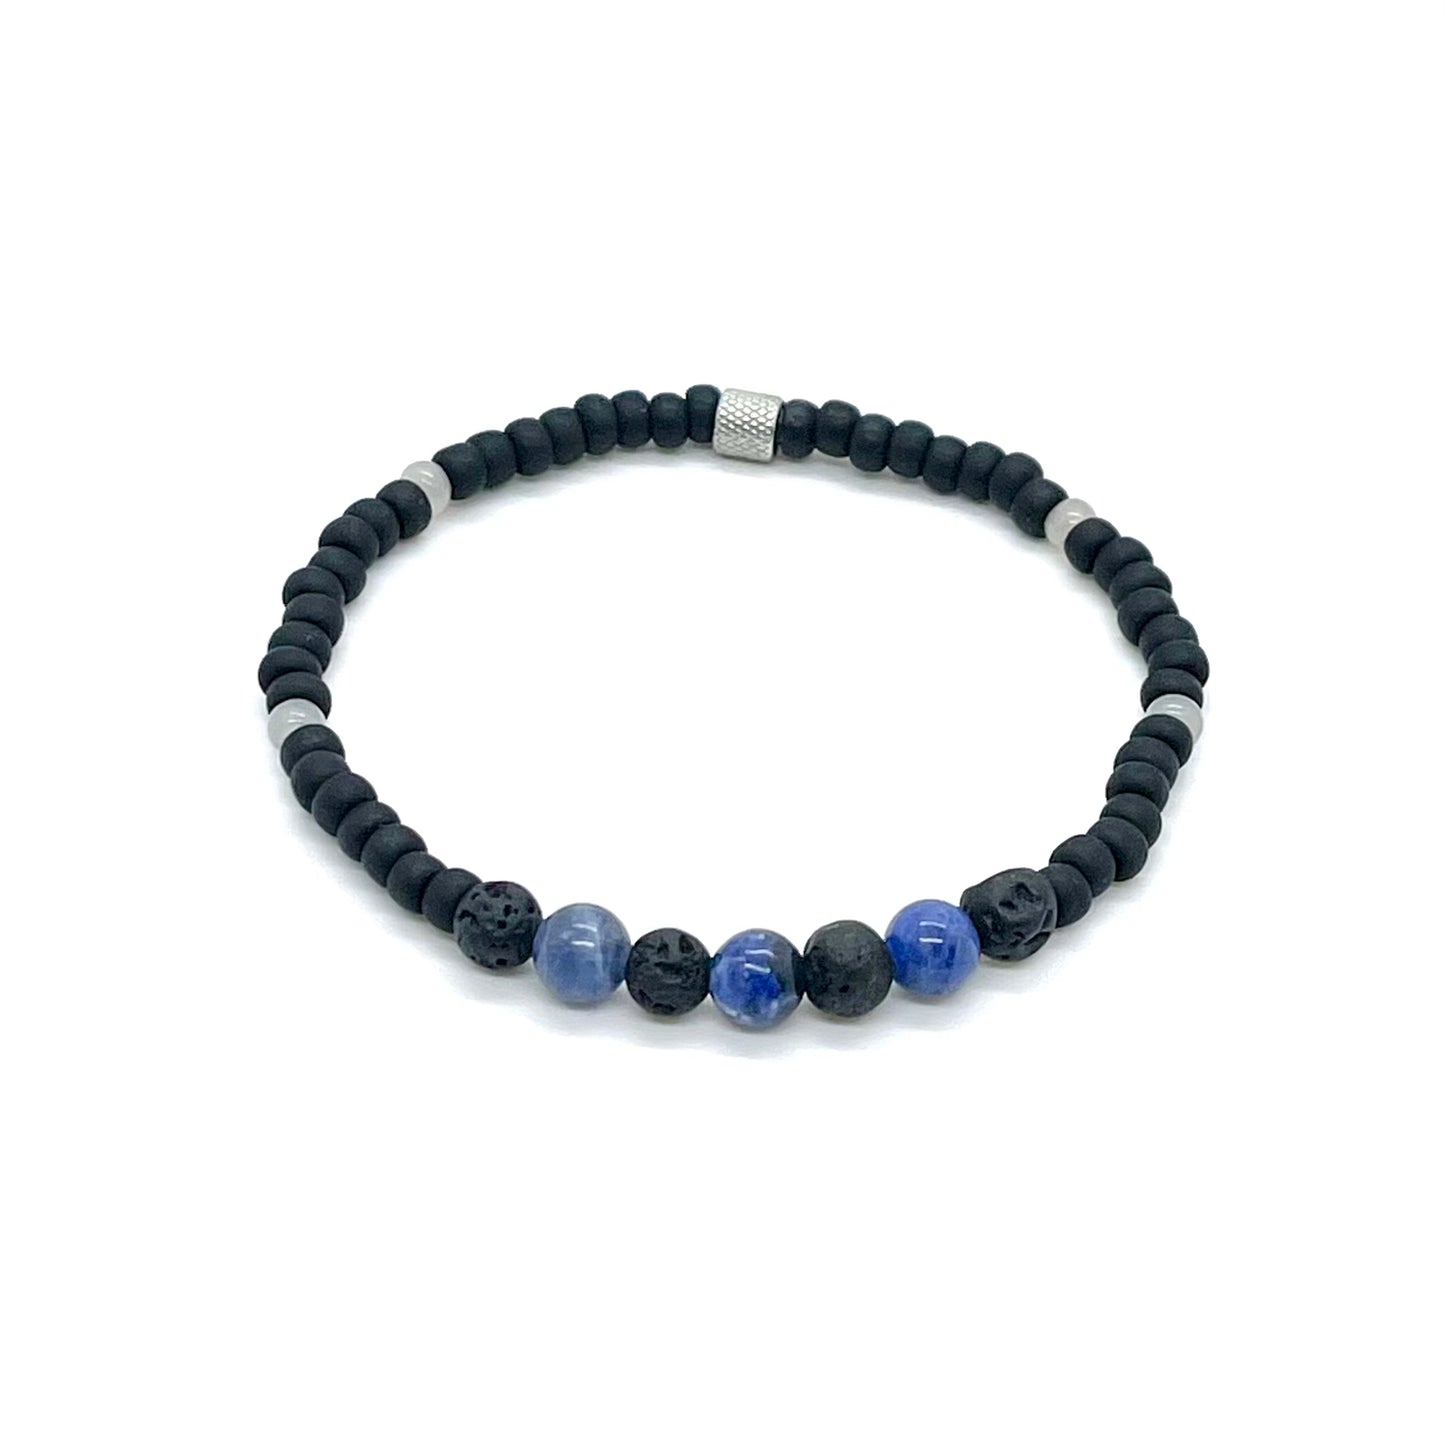 Men's lava rock braclet with blue sodalite and matte black and gray glass seed beads on elastic stretch cord.